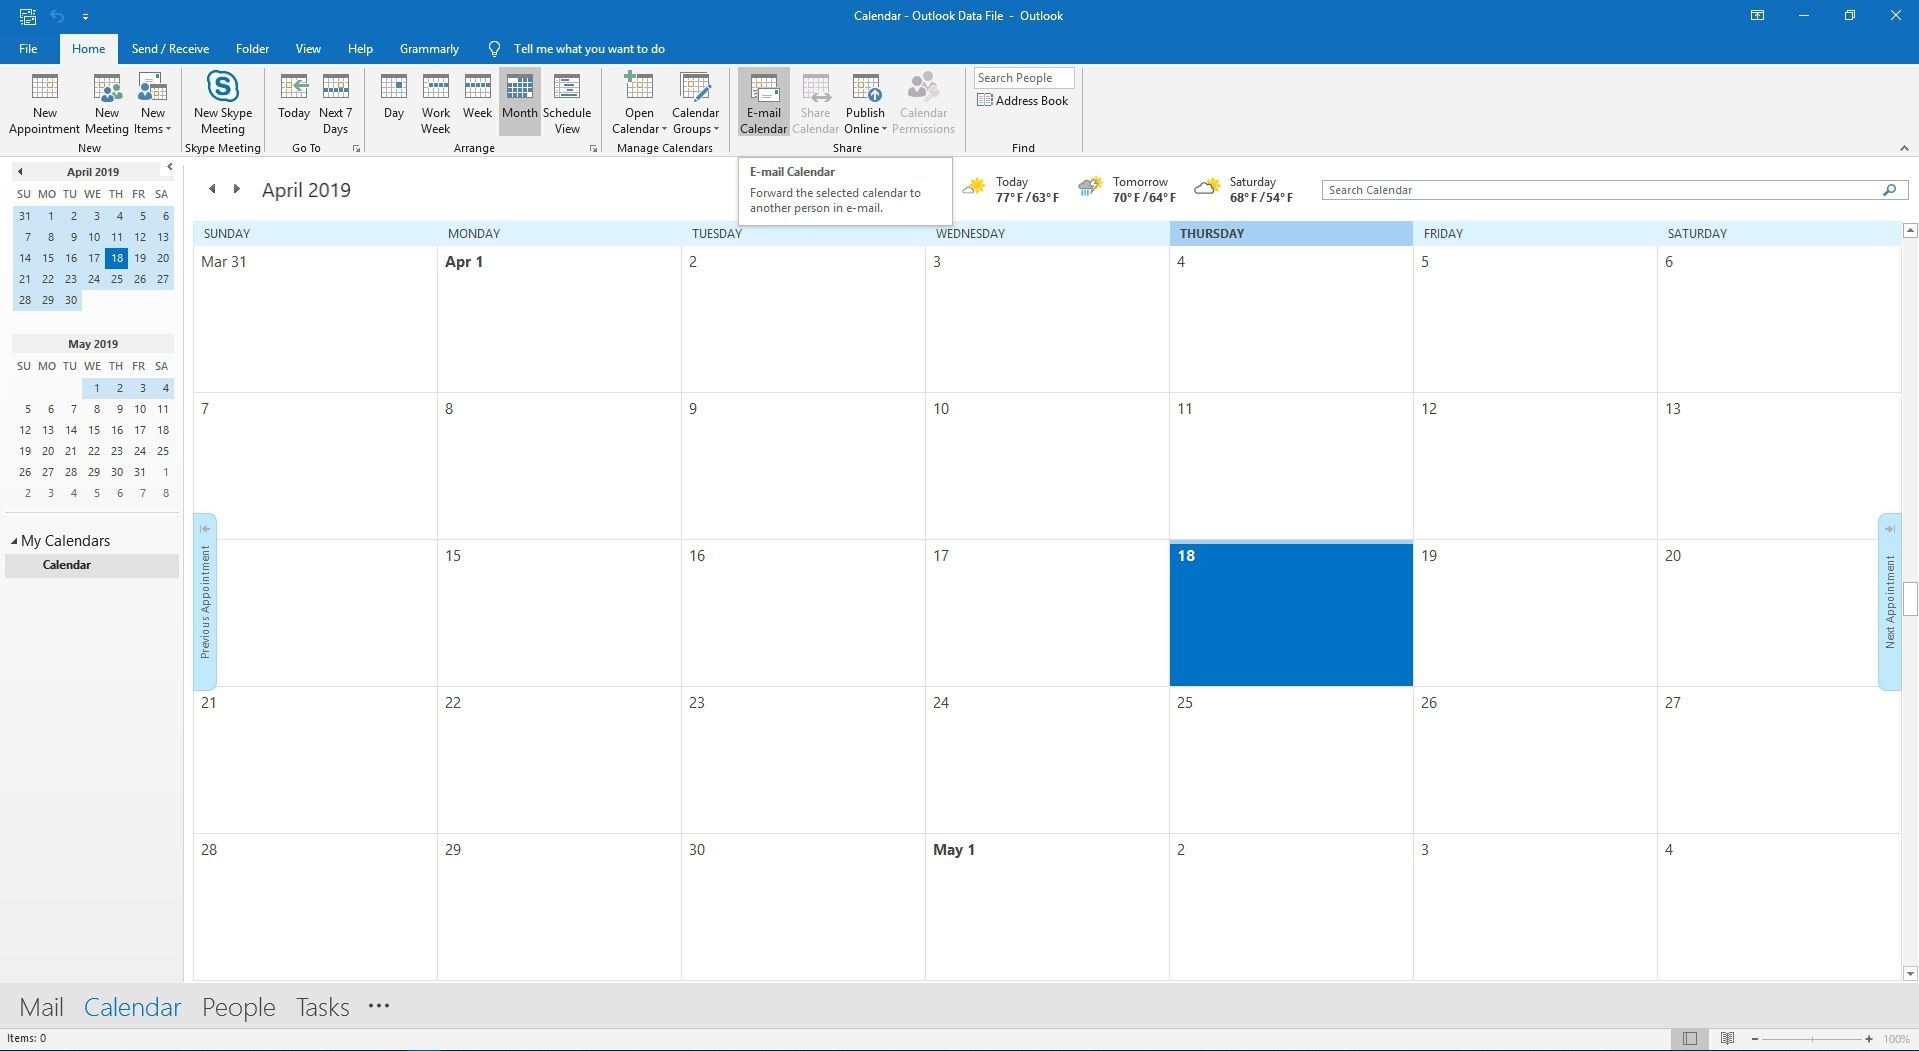 How To Add Another Persons Calendar In Outlook prntbl